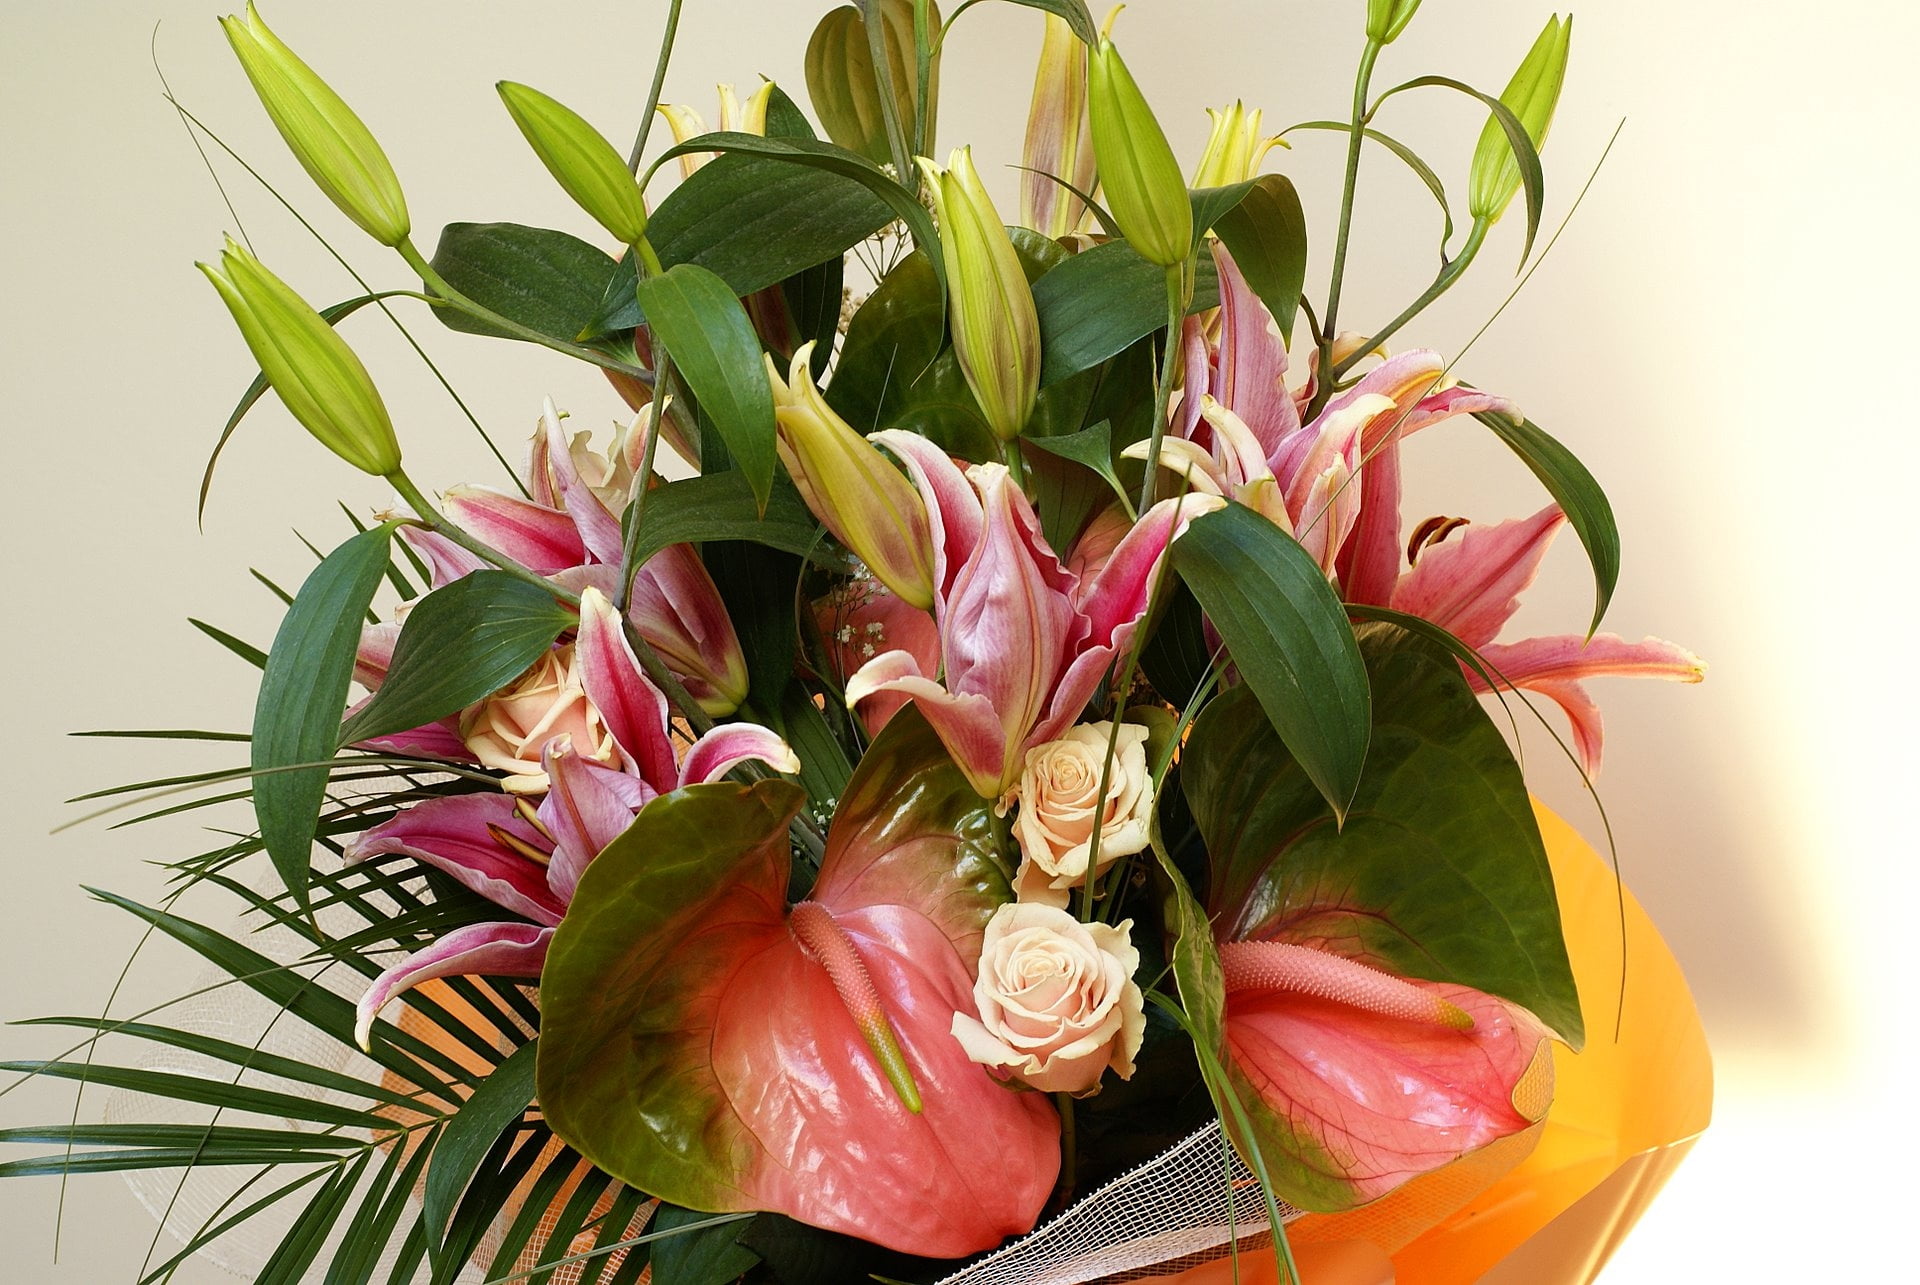 Anthurium and Calla lily flowers, roses, lilies, leaf, design